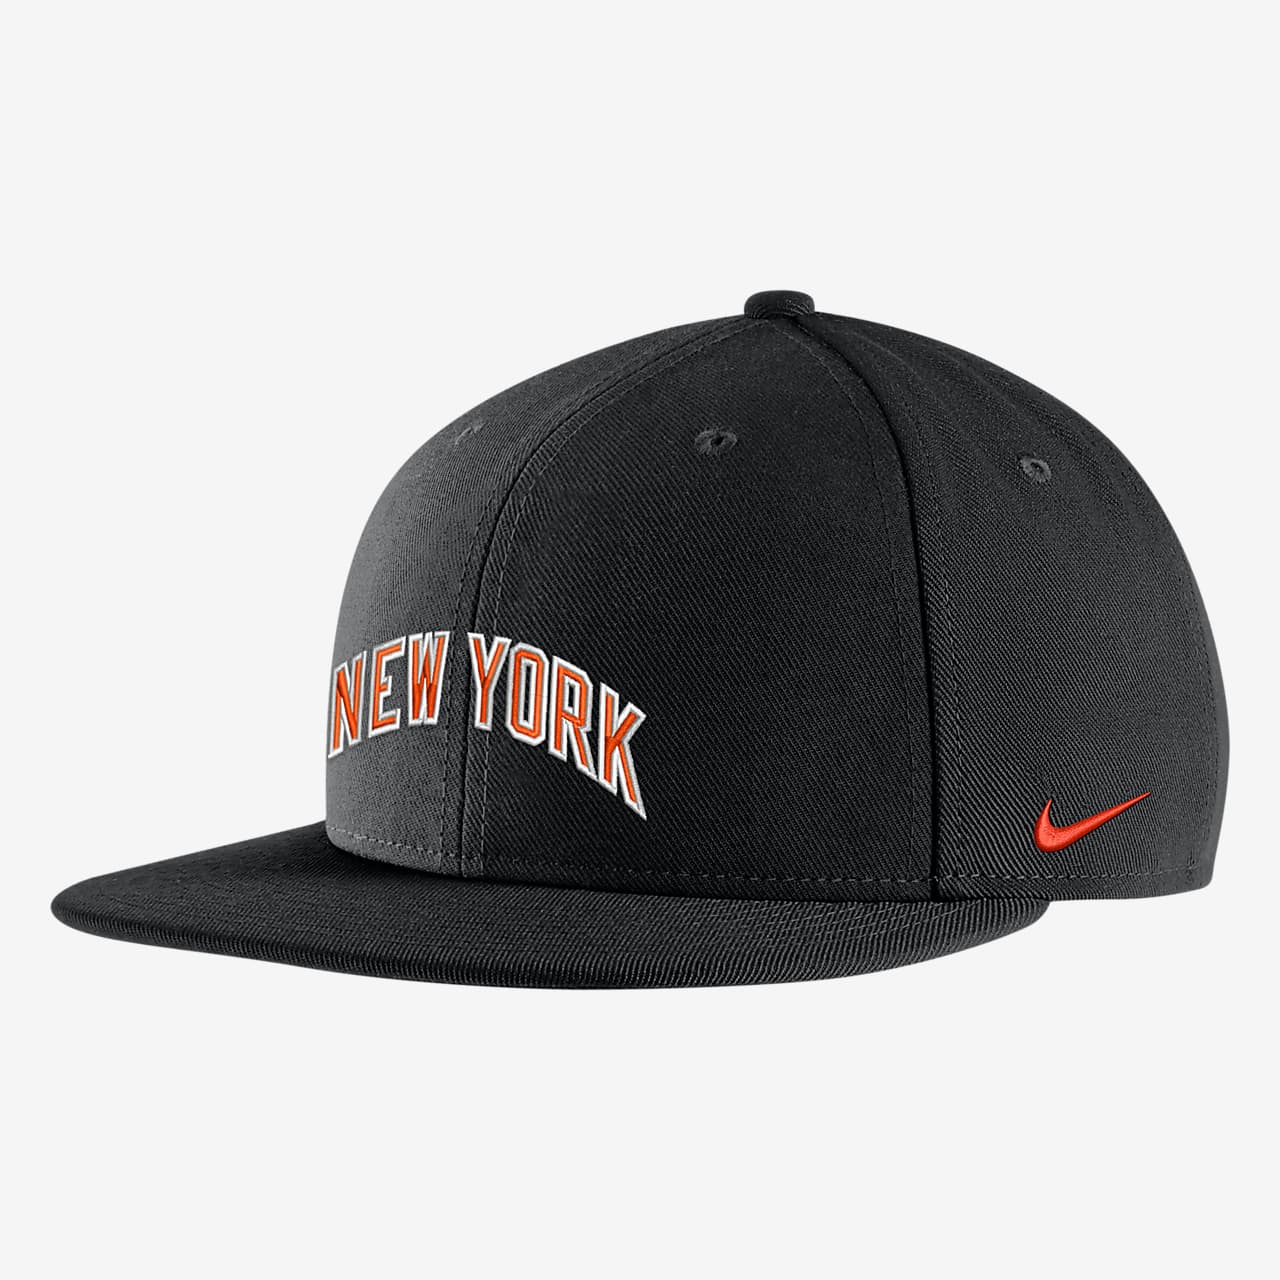 knicks fitted hat